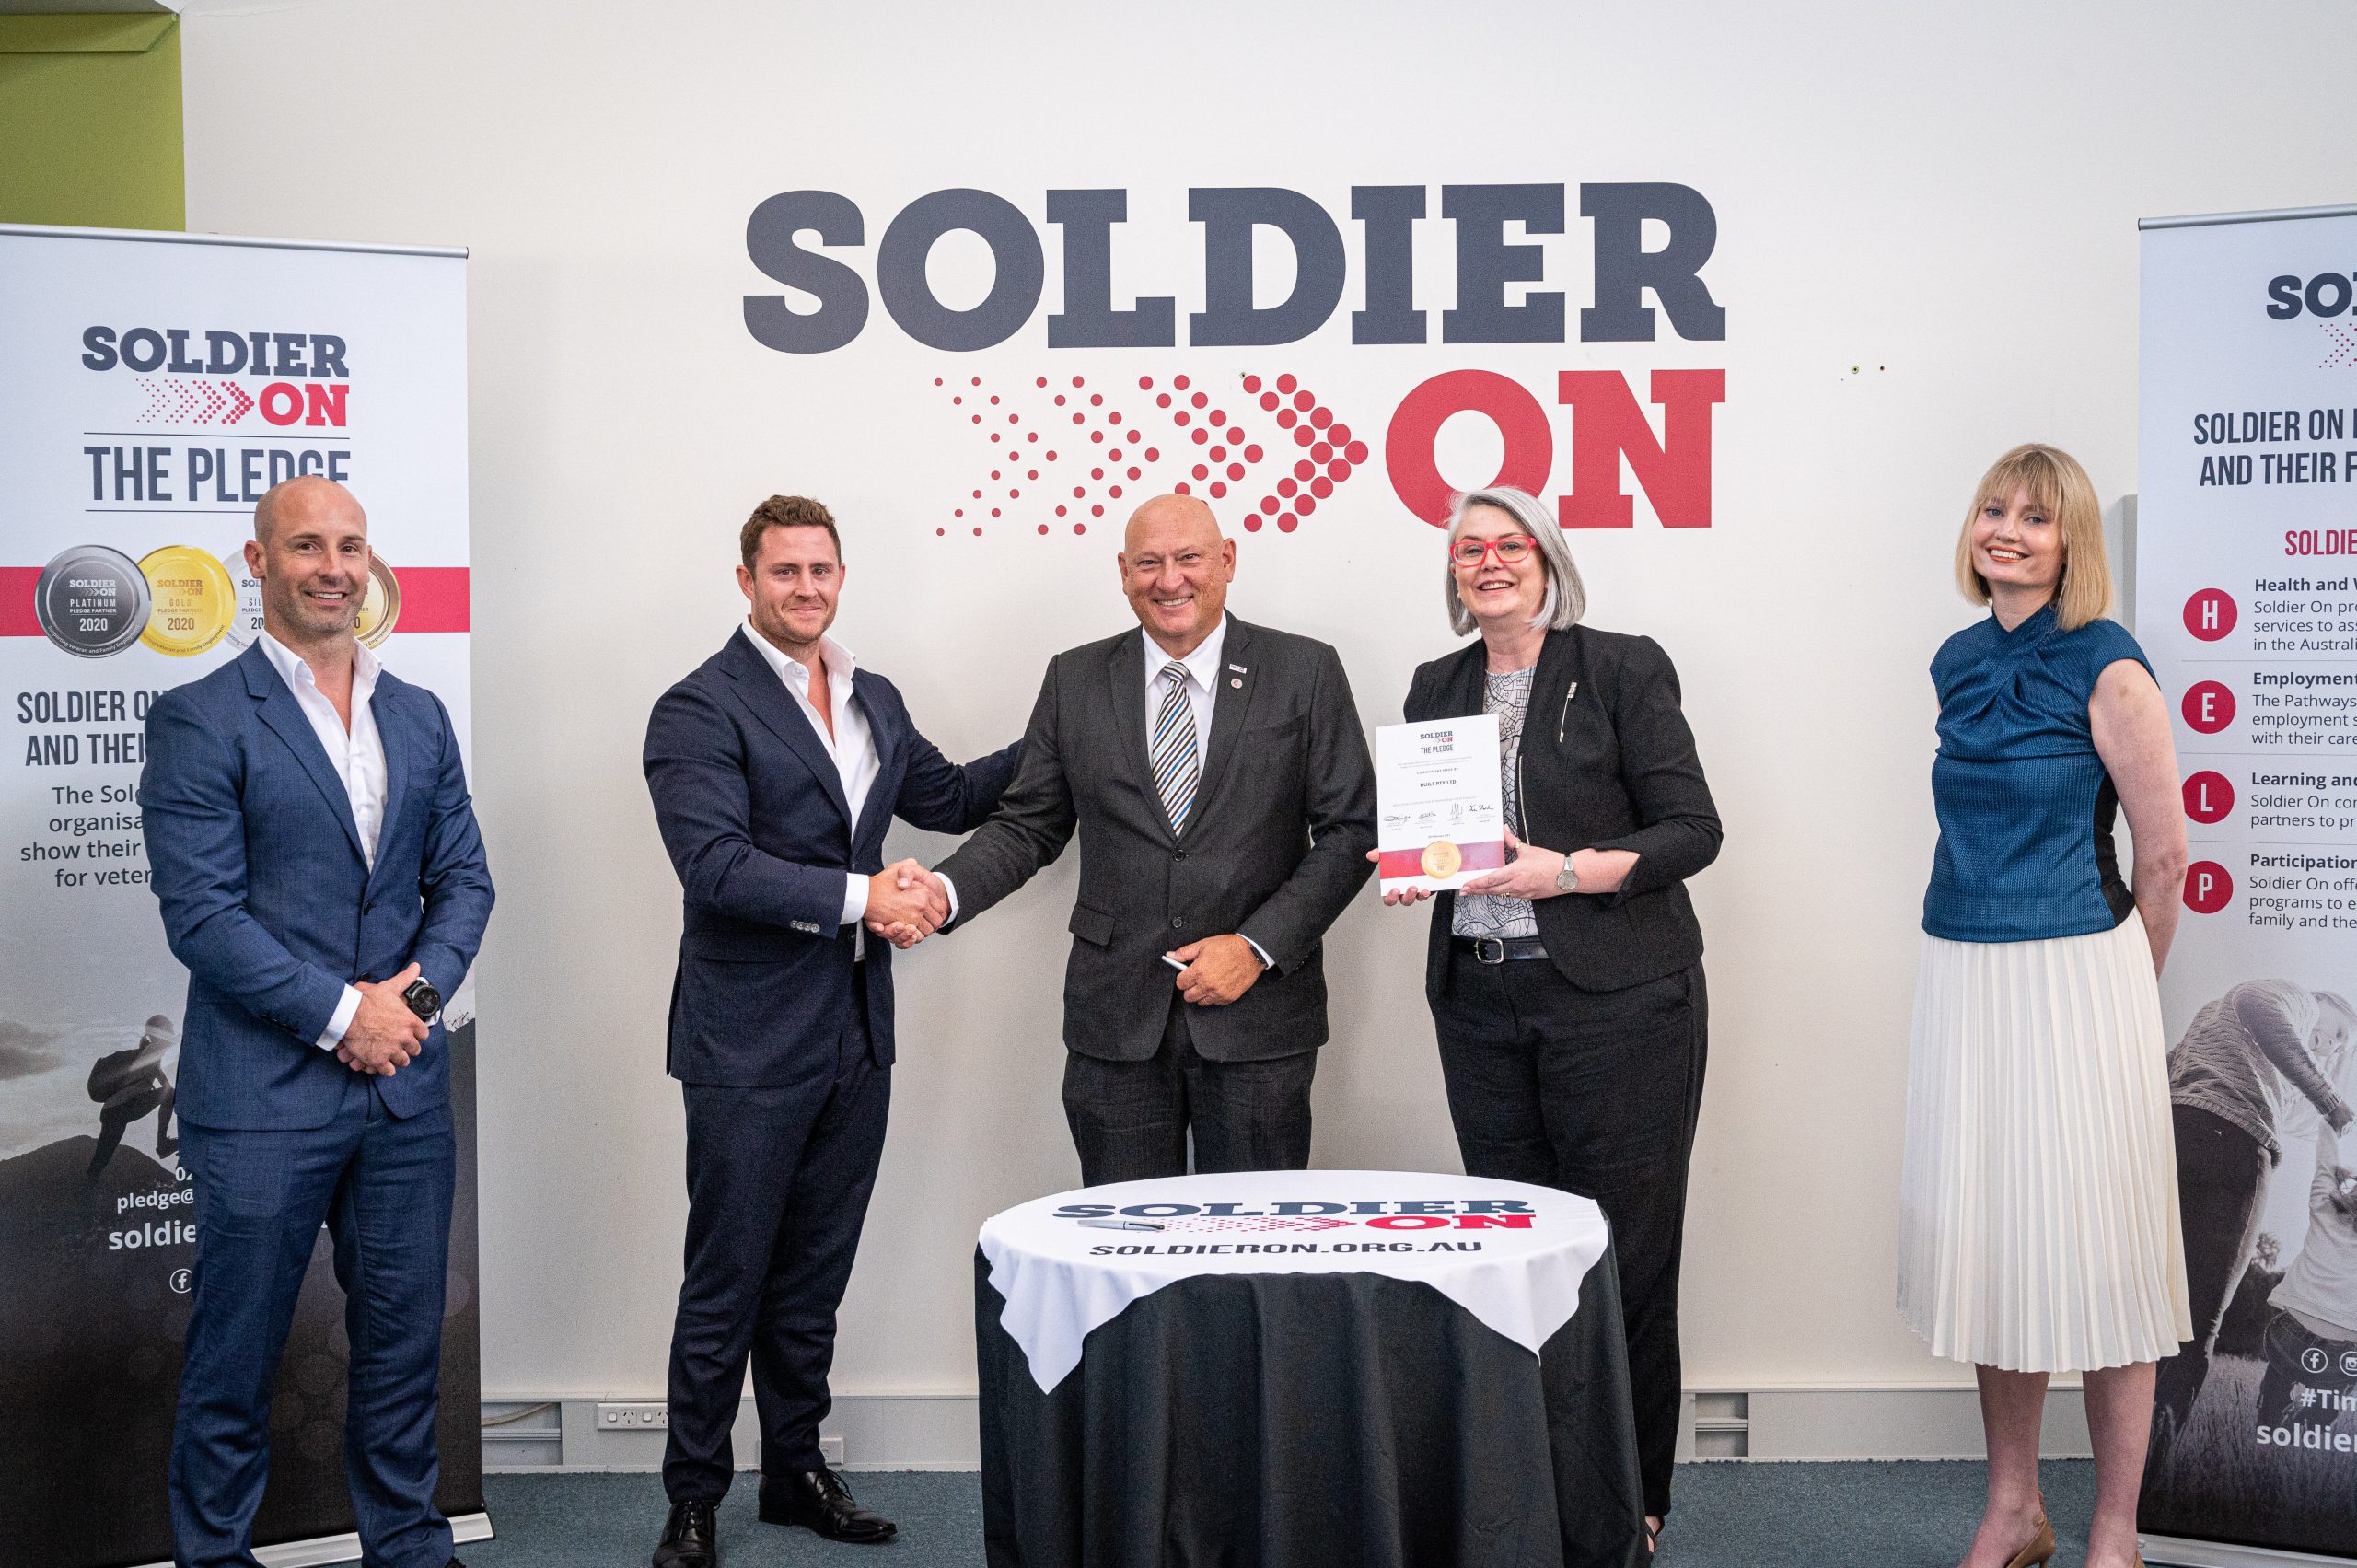 Built Joins the Soldier On Pledge in Support of Veterans